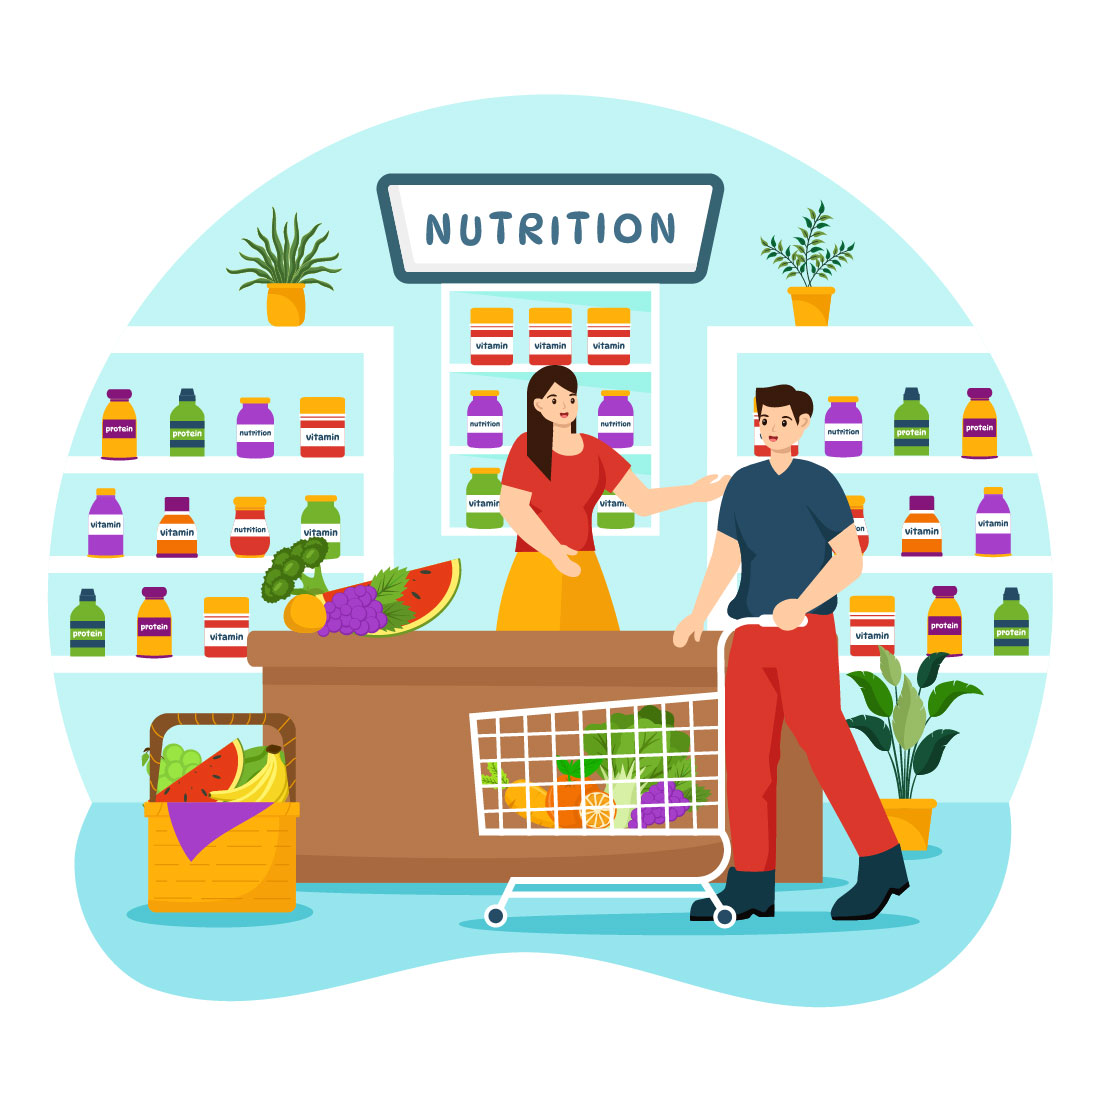 10 Nutrition Store Illustration cover image.